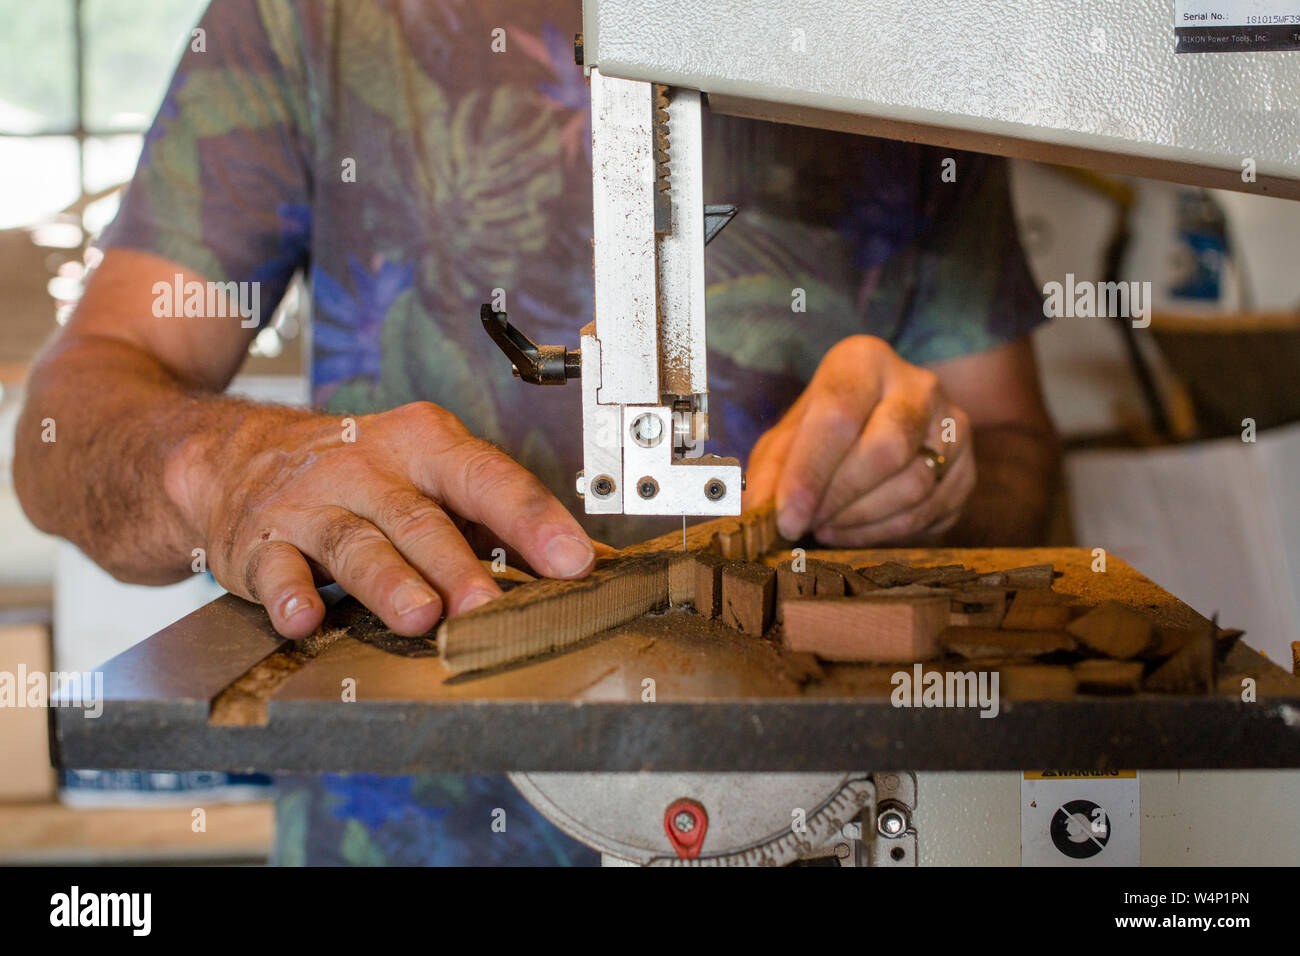 Close-up view of man crafting wood art on band saw Stock Photo